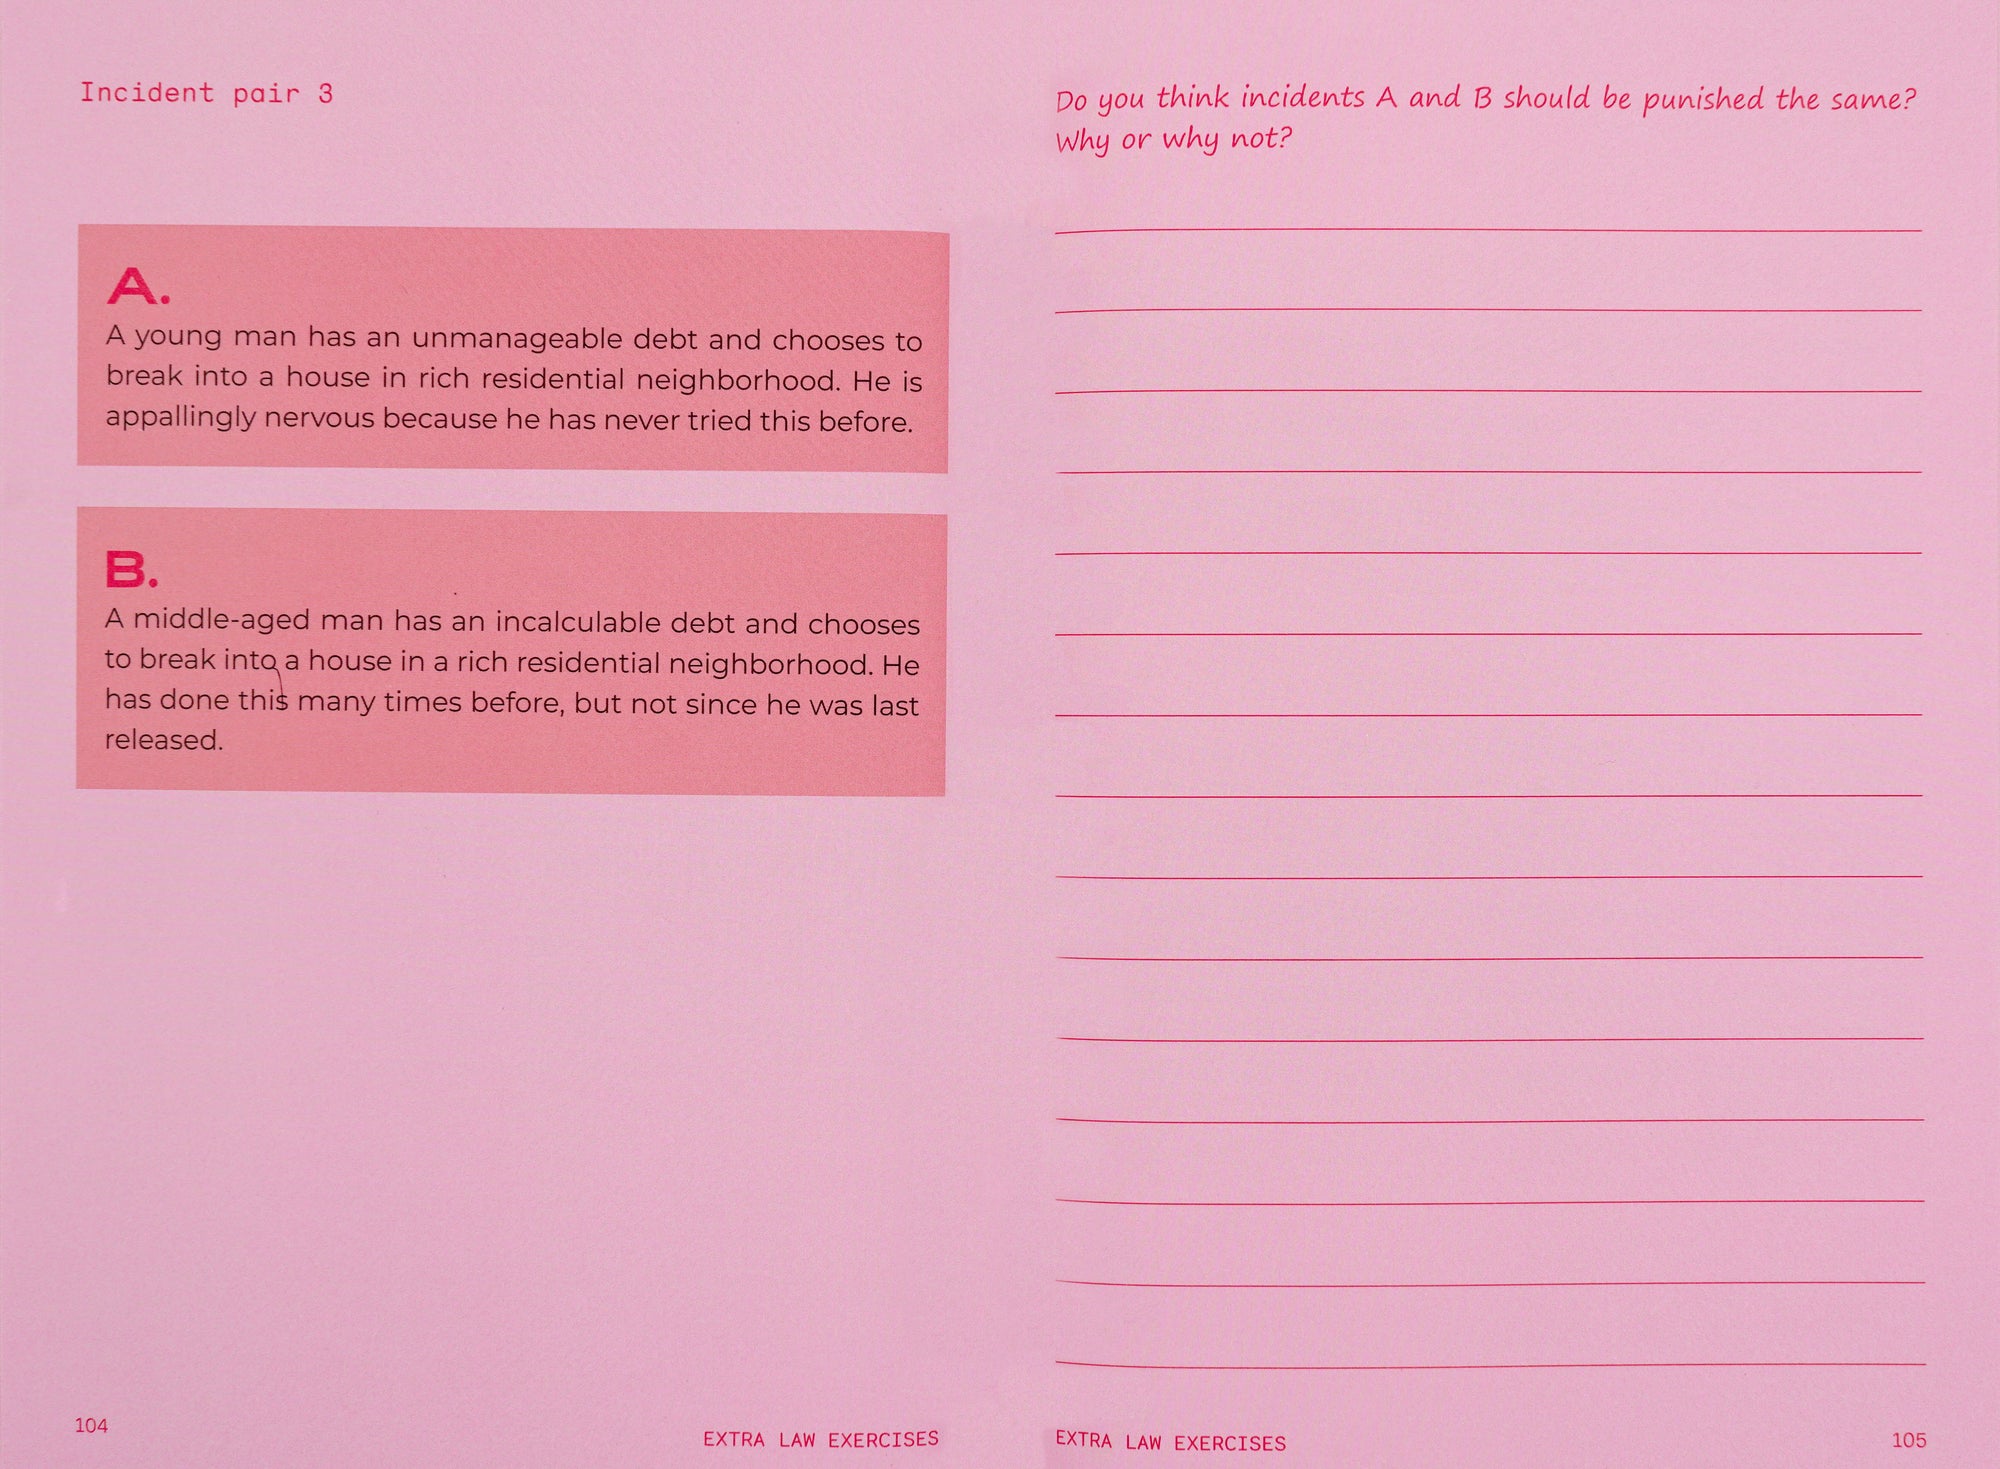 Book spread in light pink, on the left side in darker pink there are two text boxes titled A. and B. and on the right side a question in serif writing followed by empty lines in order to be filled in.